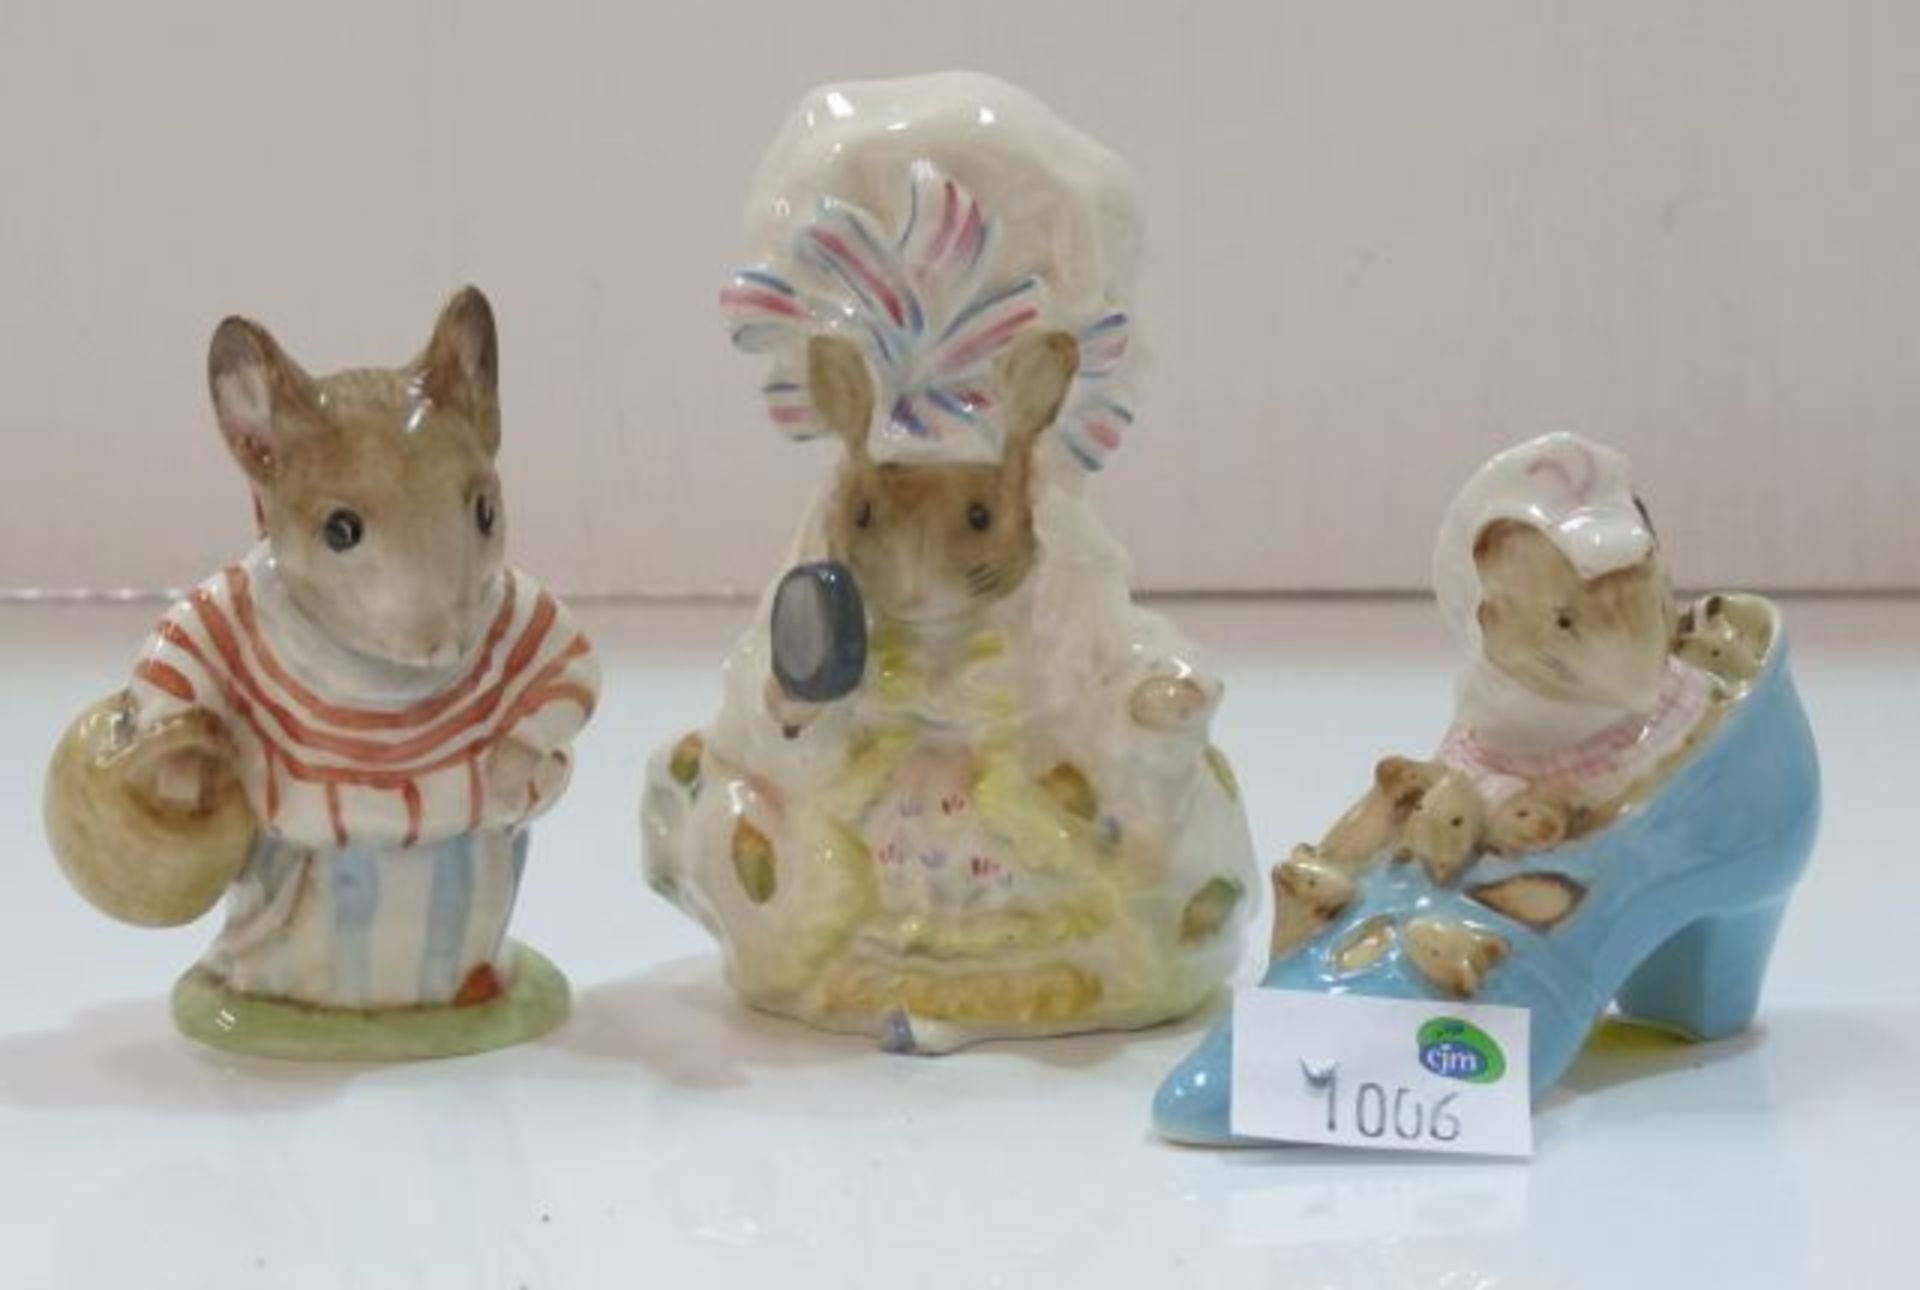 Three Beswick Beatrix Potter Figures with Gold Backstamps. Mrs Tittlemouse (Style 1), The Old Woman